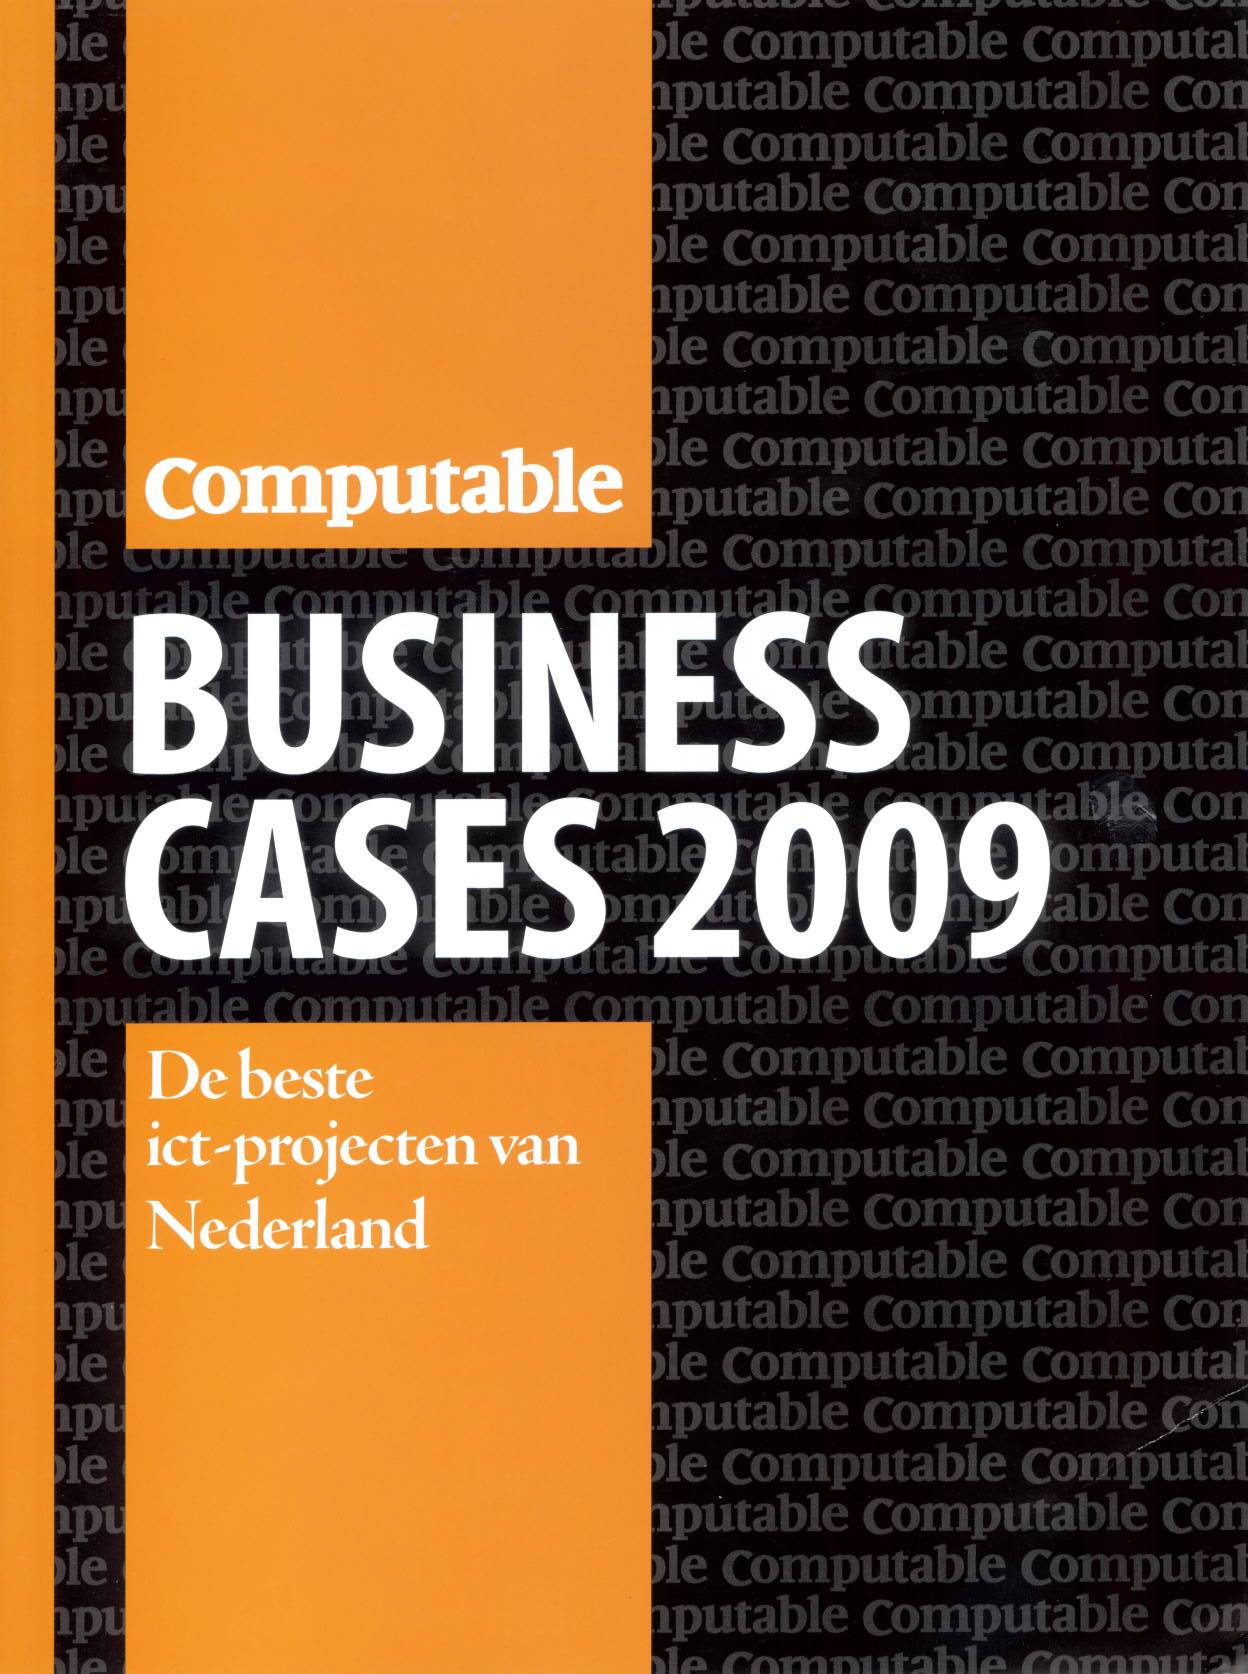 Computable Business Cases – 2009